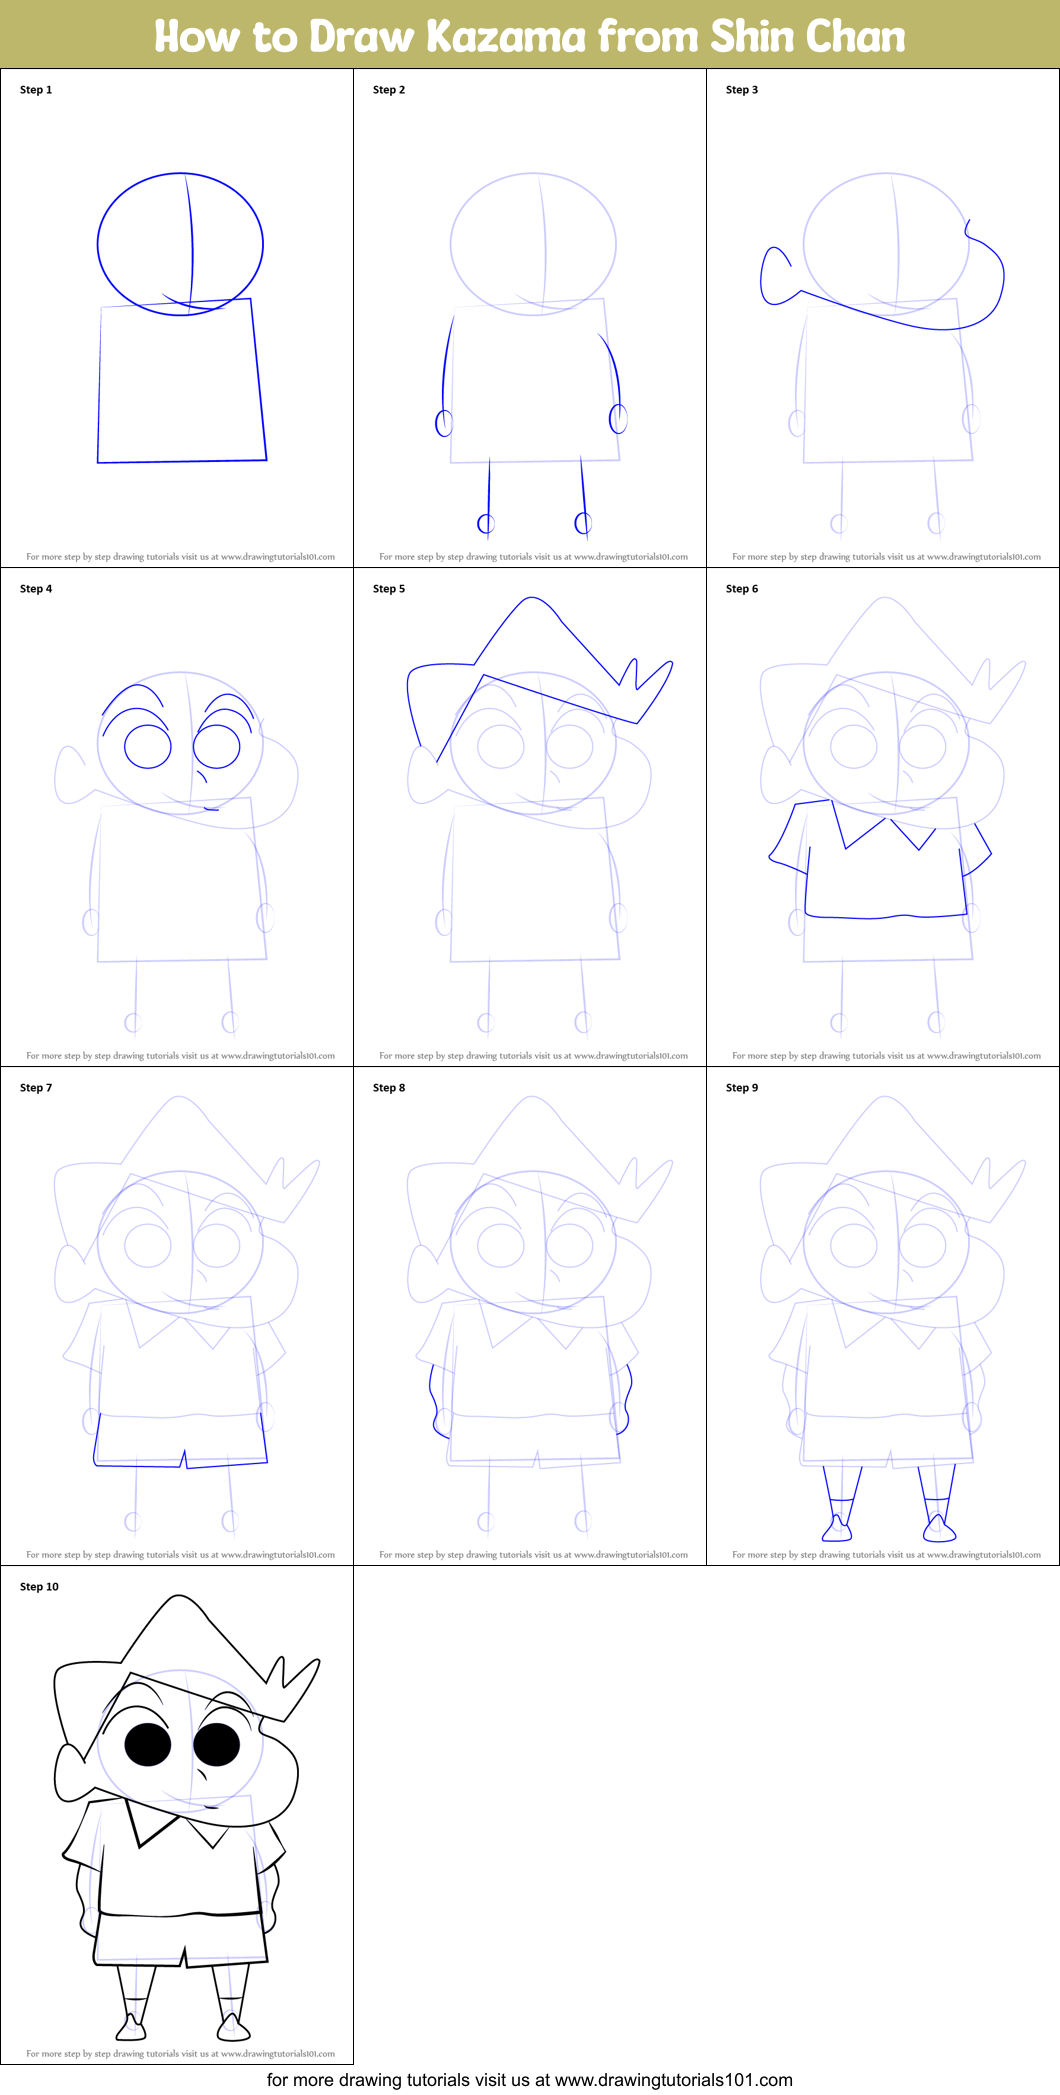 How to Draw Kazama from Shin Chan printable step by step drawing sheet